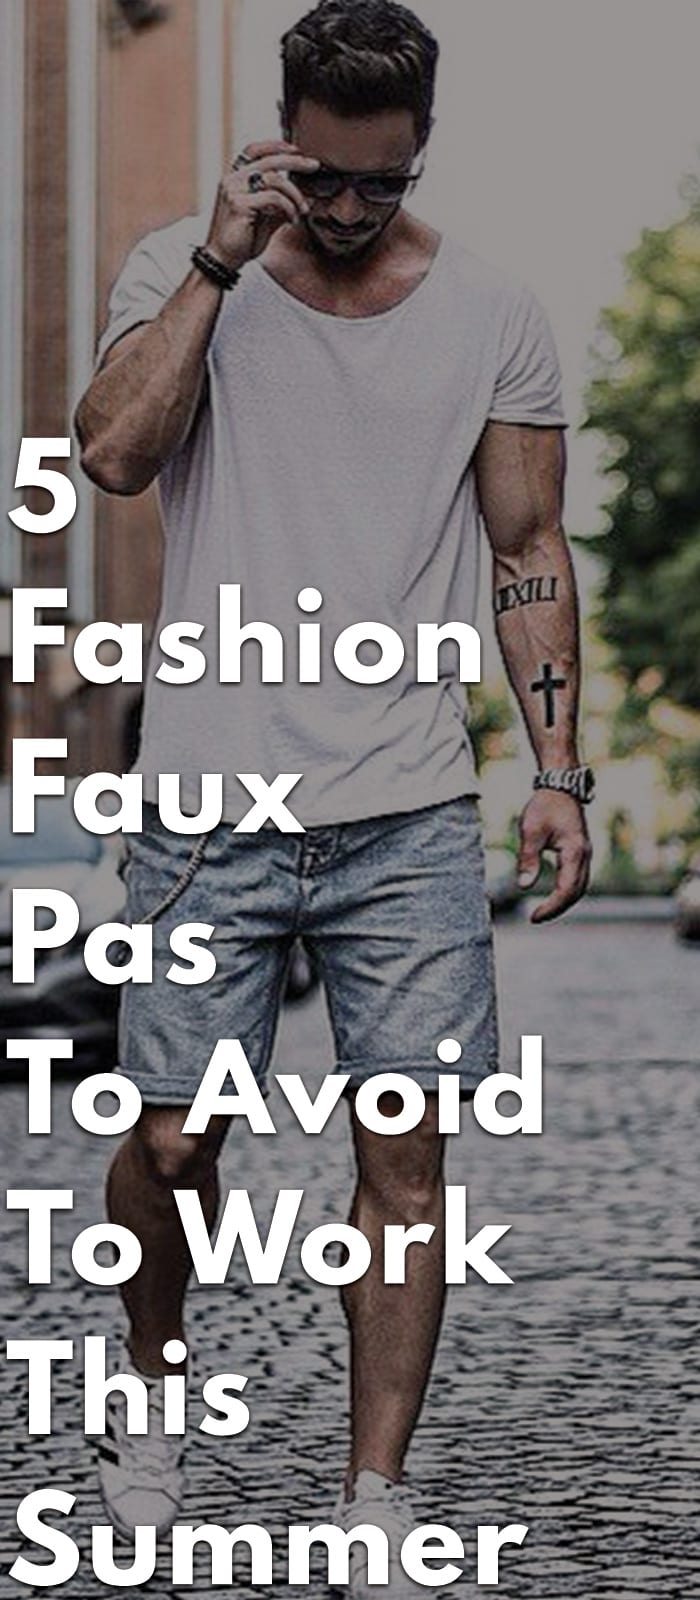 5-Fashion-Faux-Pas-To-Avoid-To-Work-This-Summer